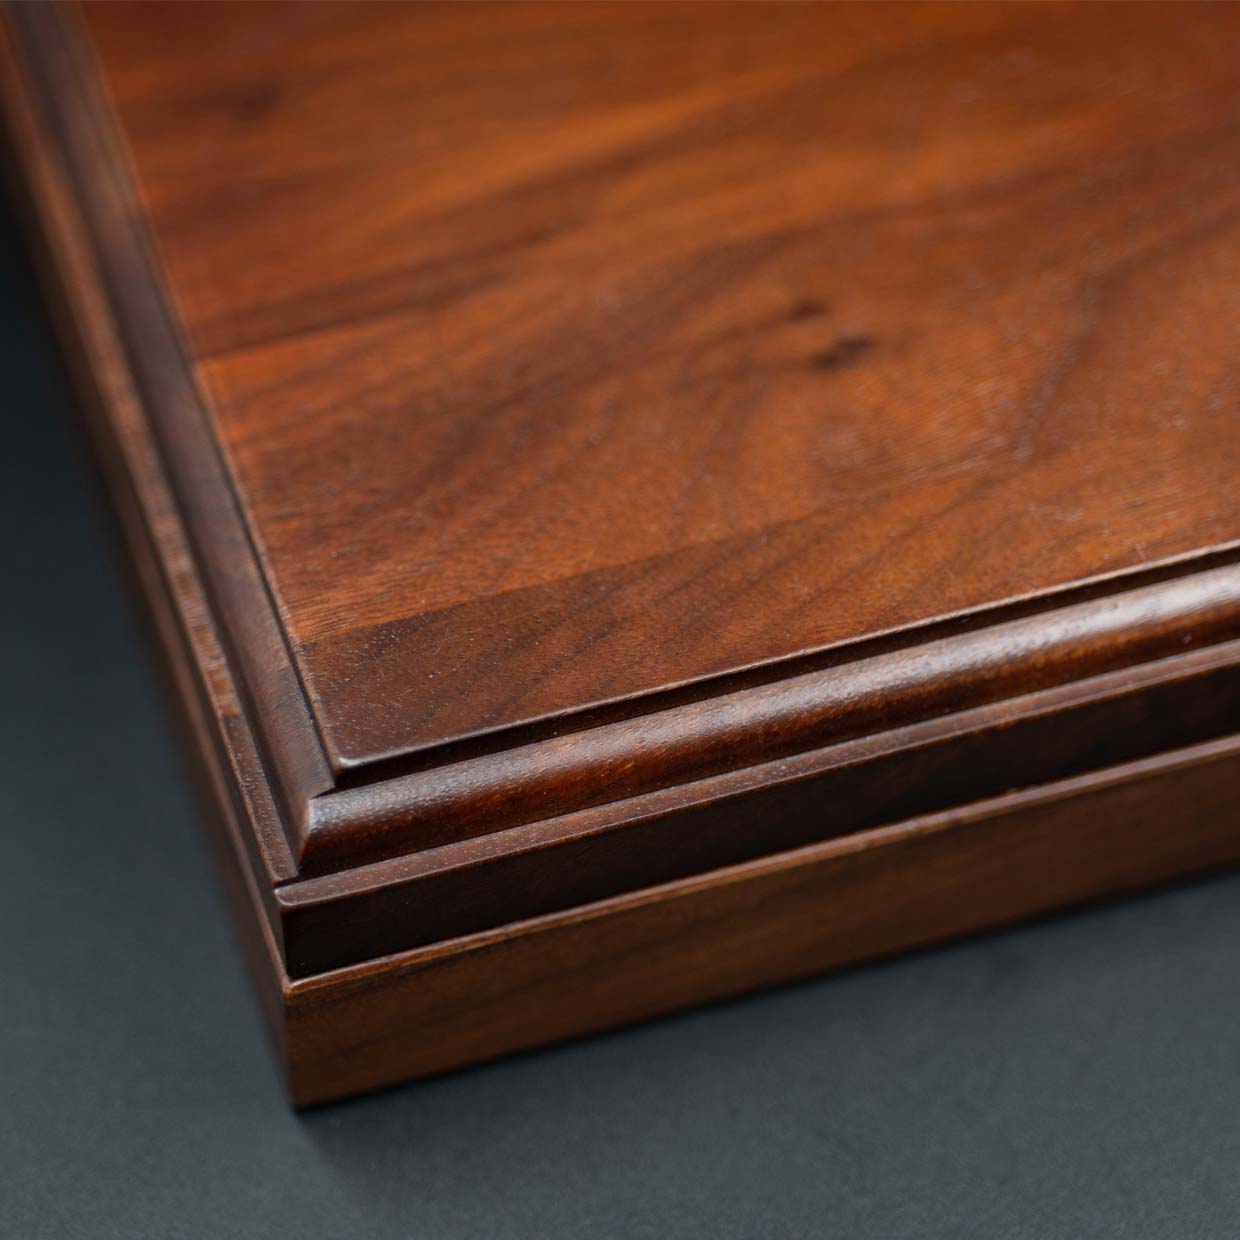 Cherry Stained Wood Box Detail